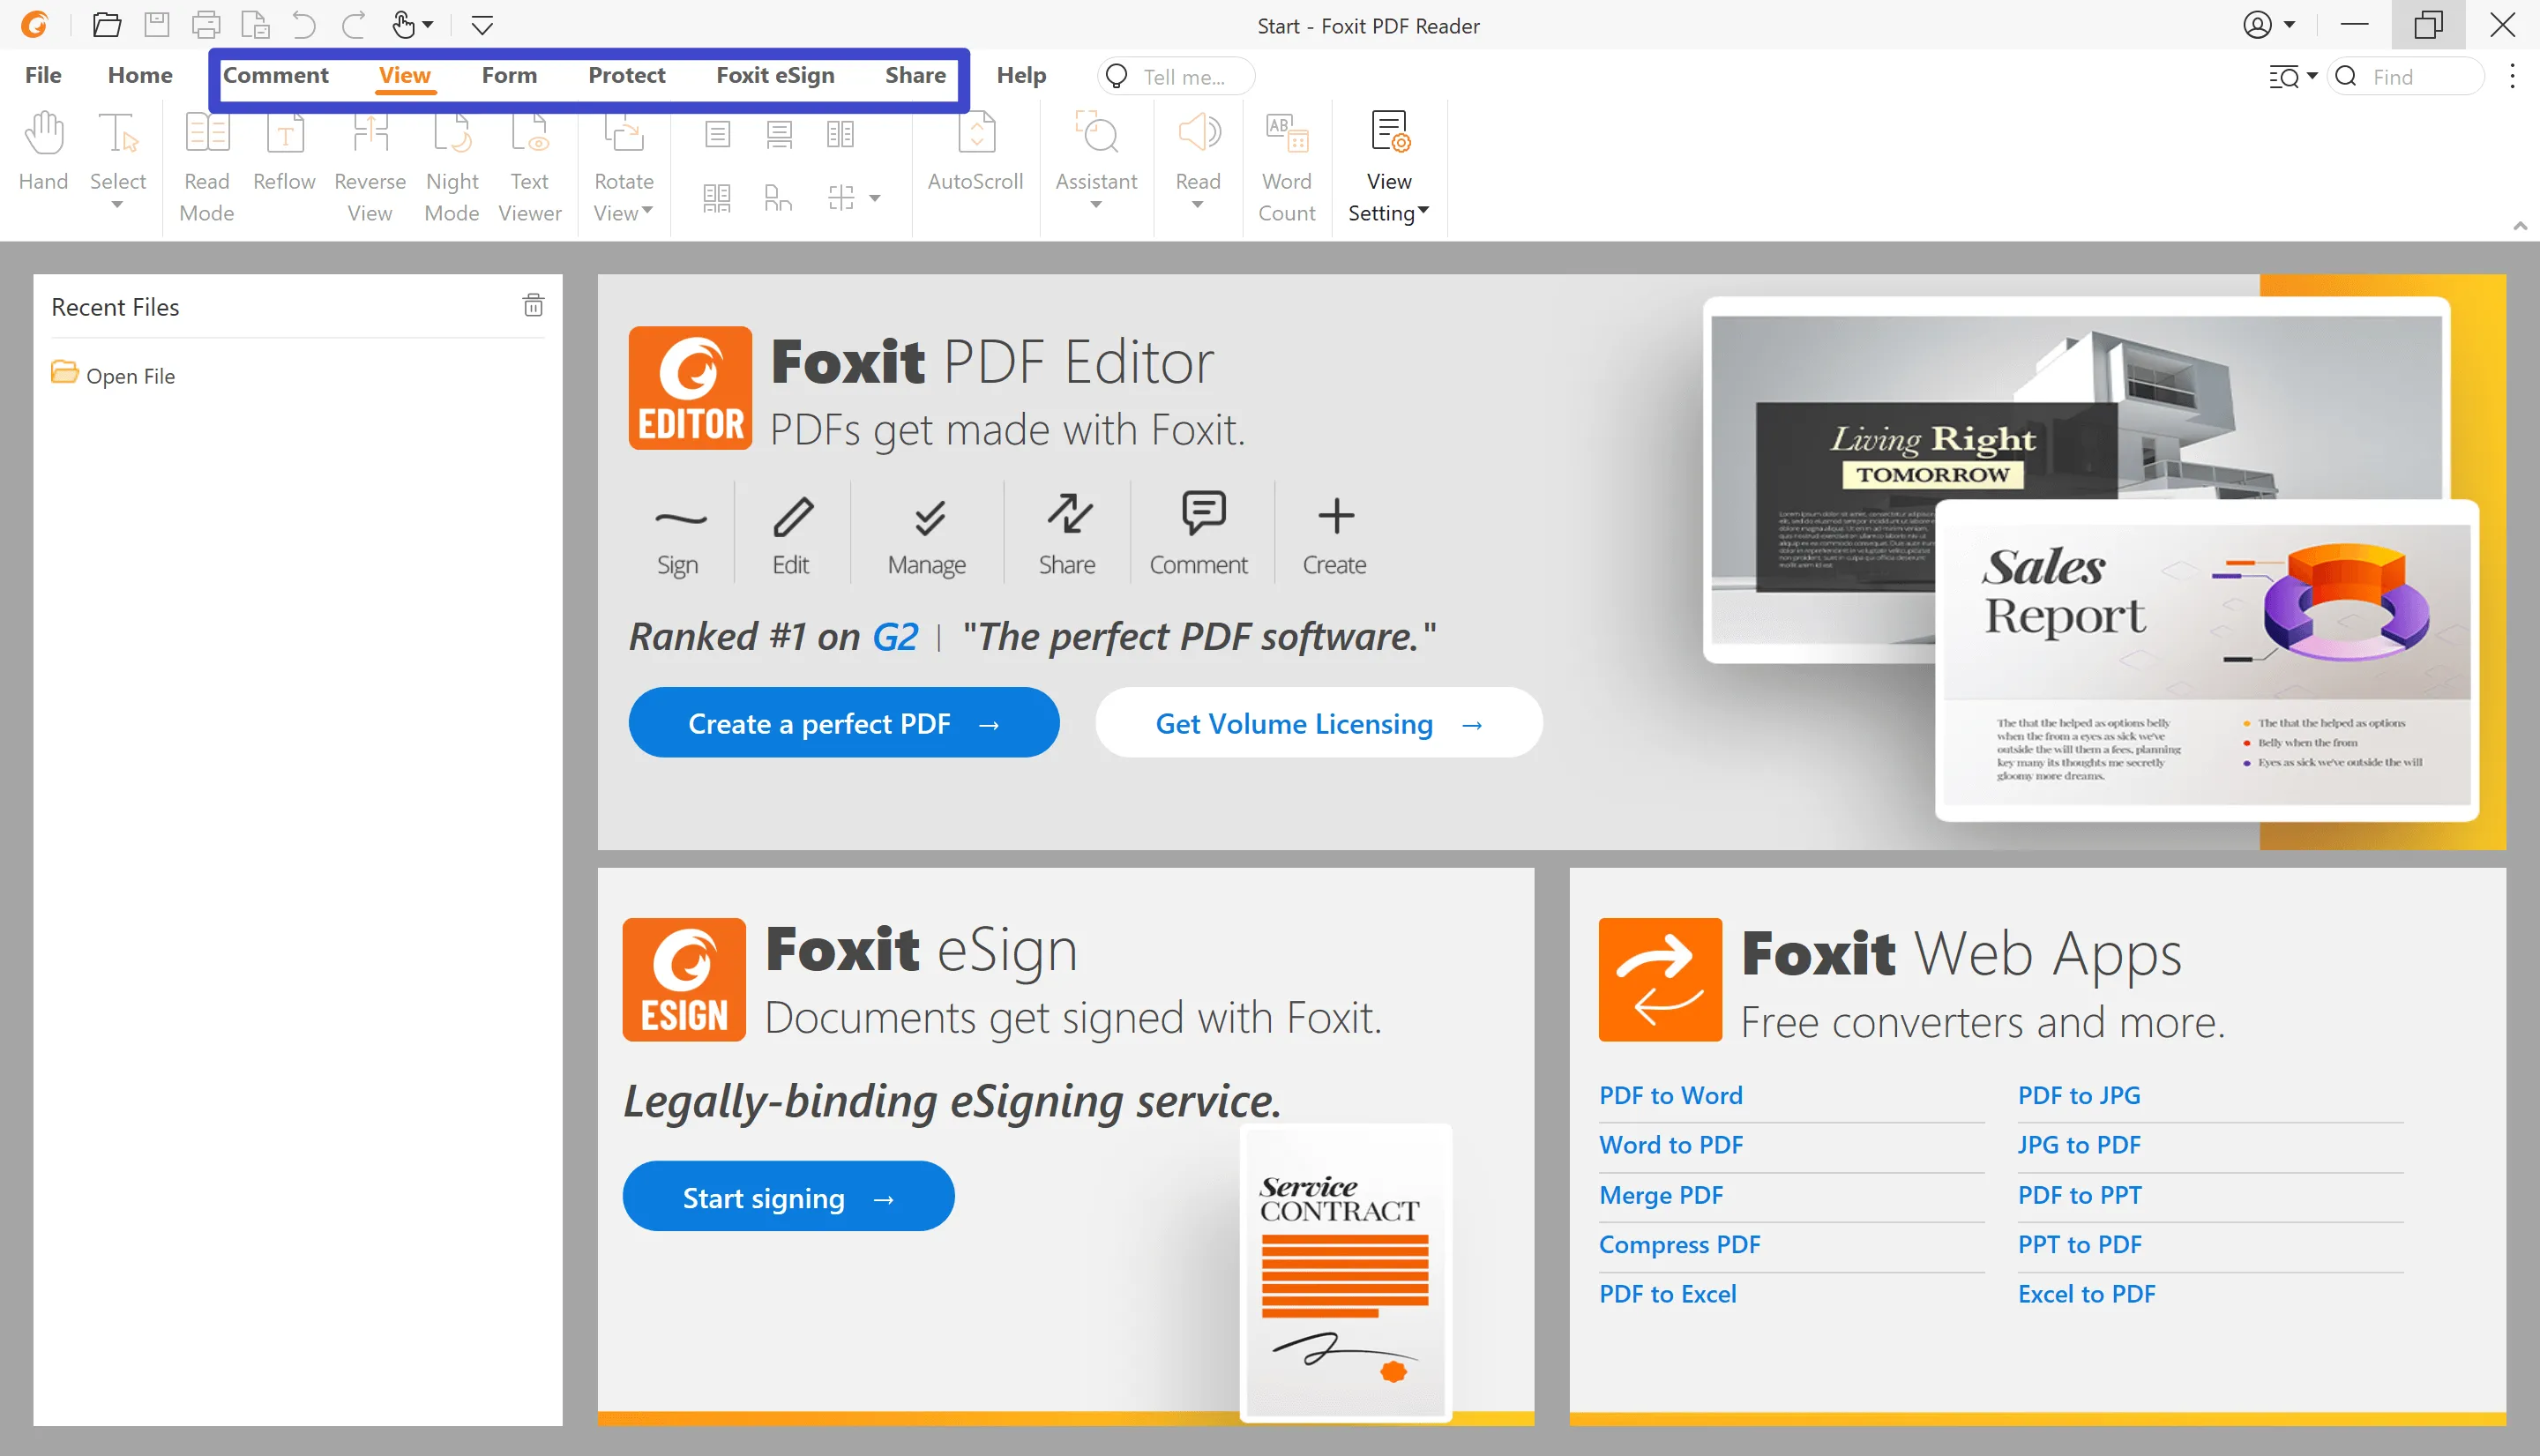 Features of Foxit Reader